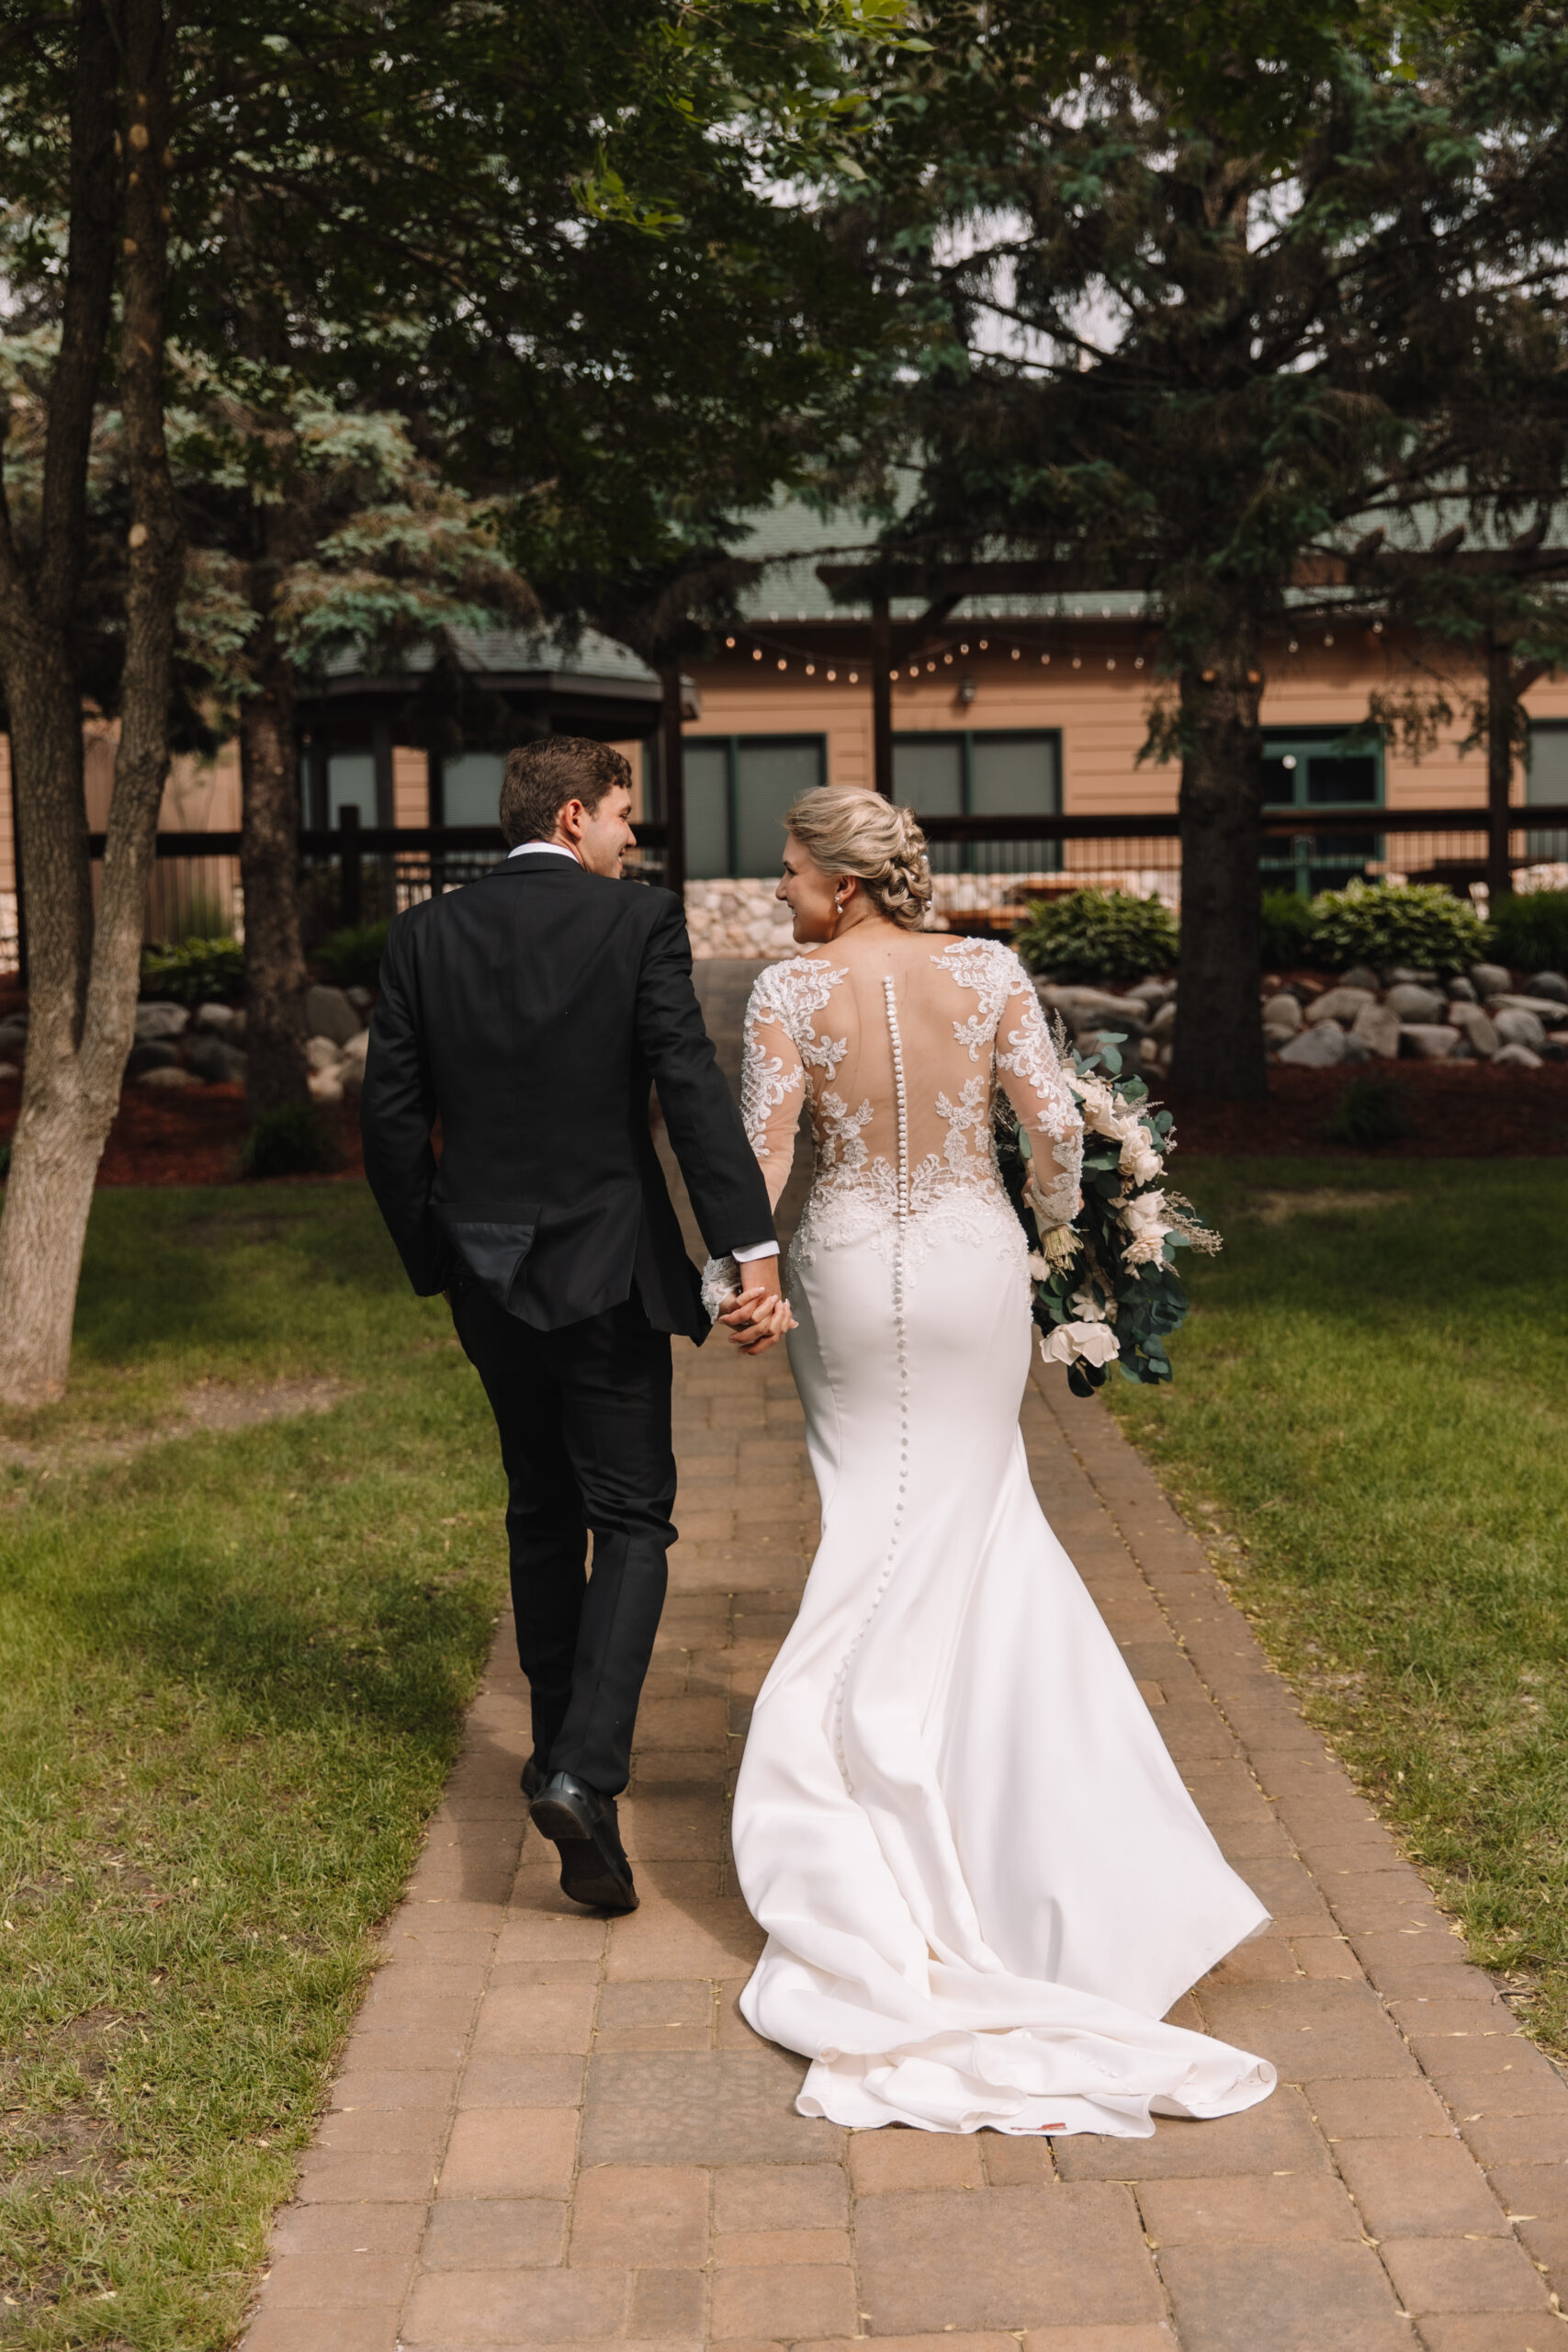 Bride with an open back illusion lace wedding dress with buttons all the way down her spine, walking with her Groom laughing together